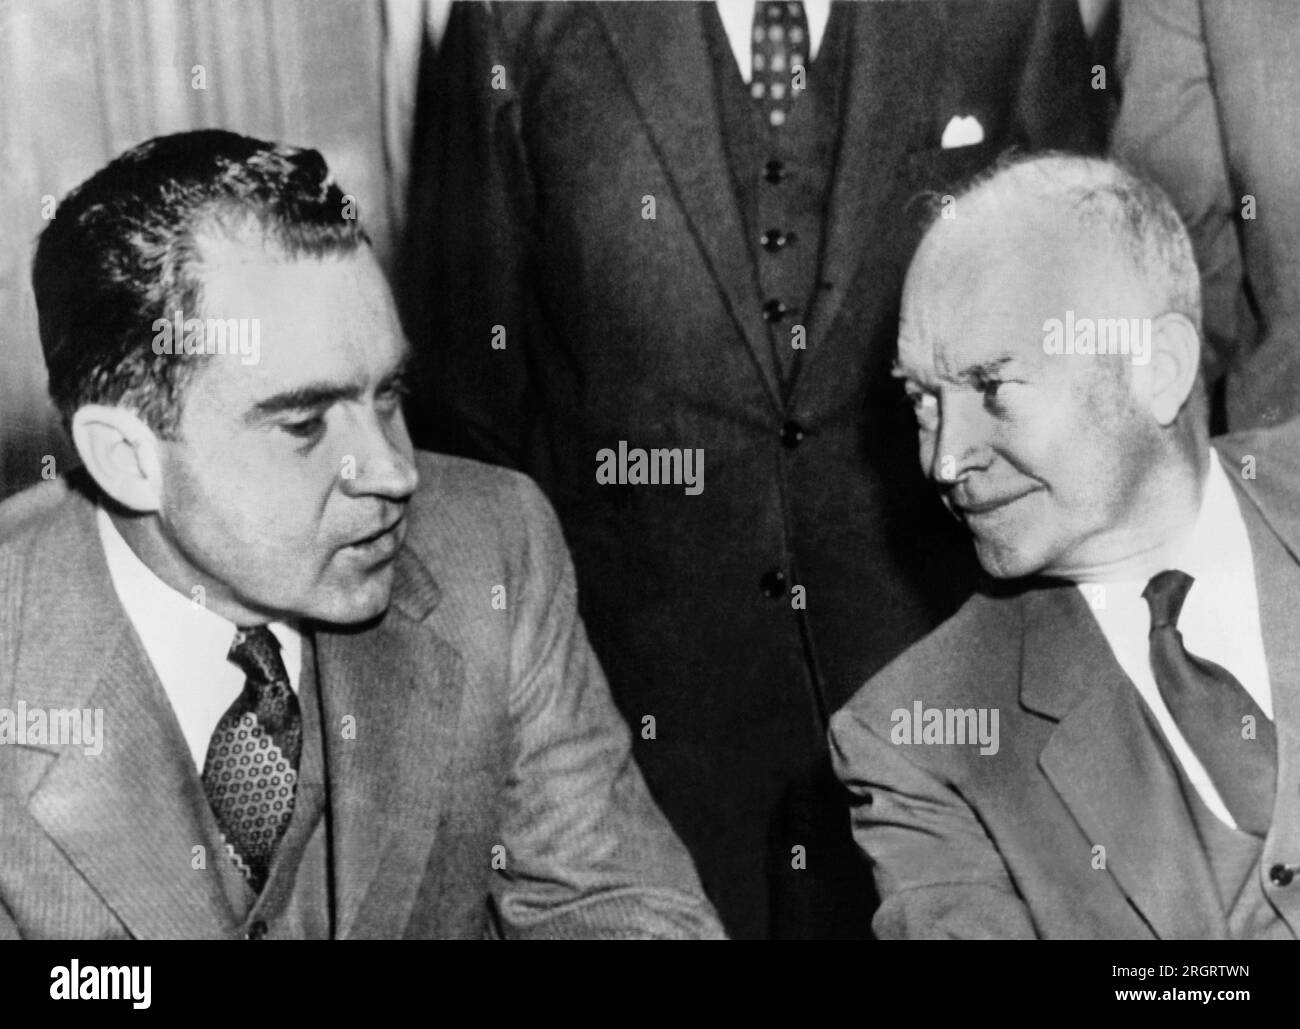 Washington, D.C.:  March 16, 1960 President Dwight D. Eisenhower endorsed Vice President Richard Nixon as his personal choice for the 1960 Republican Presidential nomination. Photograph shown is from 12/26/1956. Stock Photo